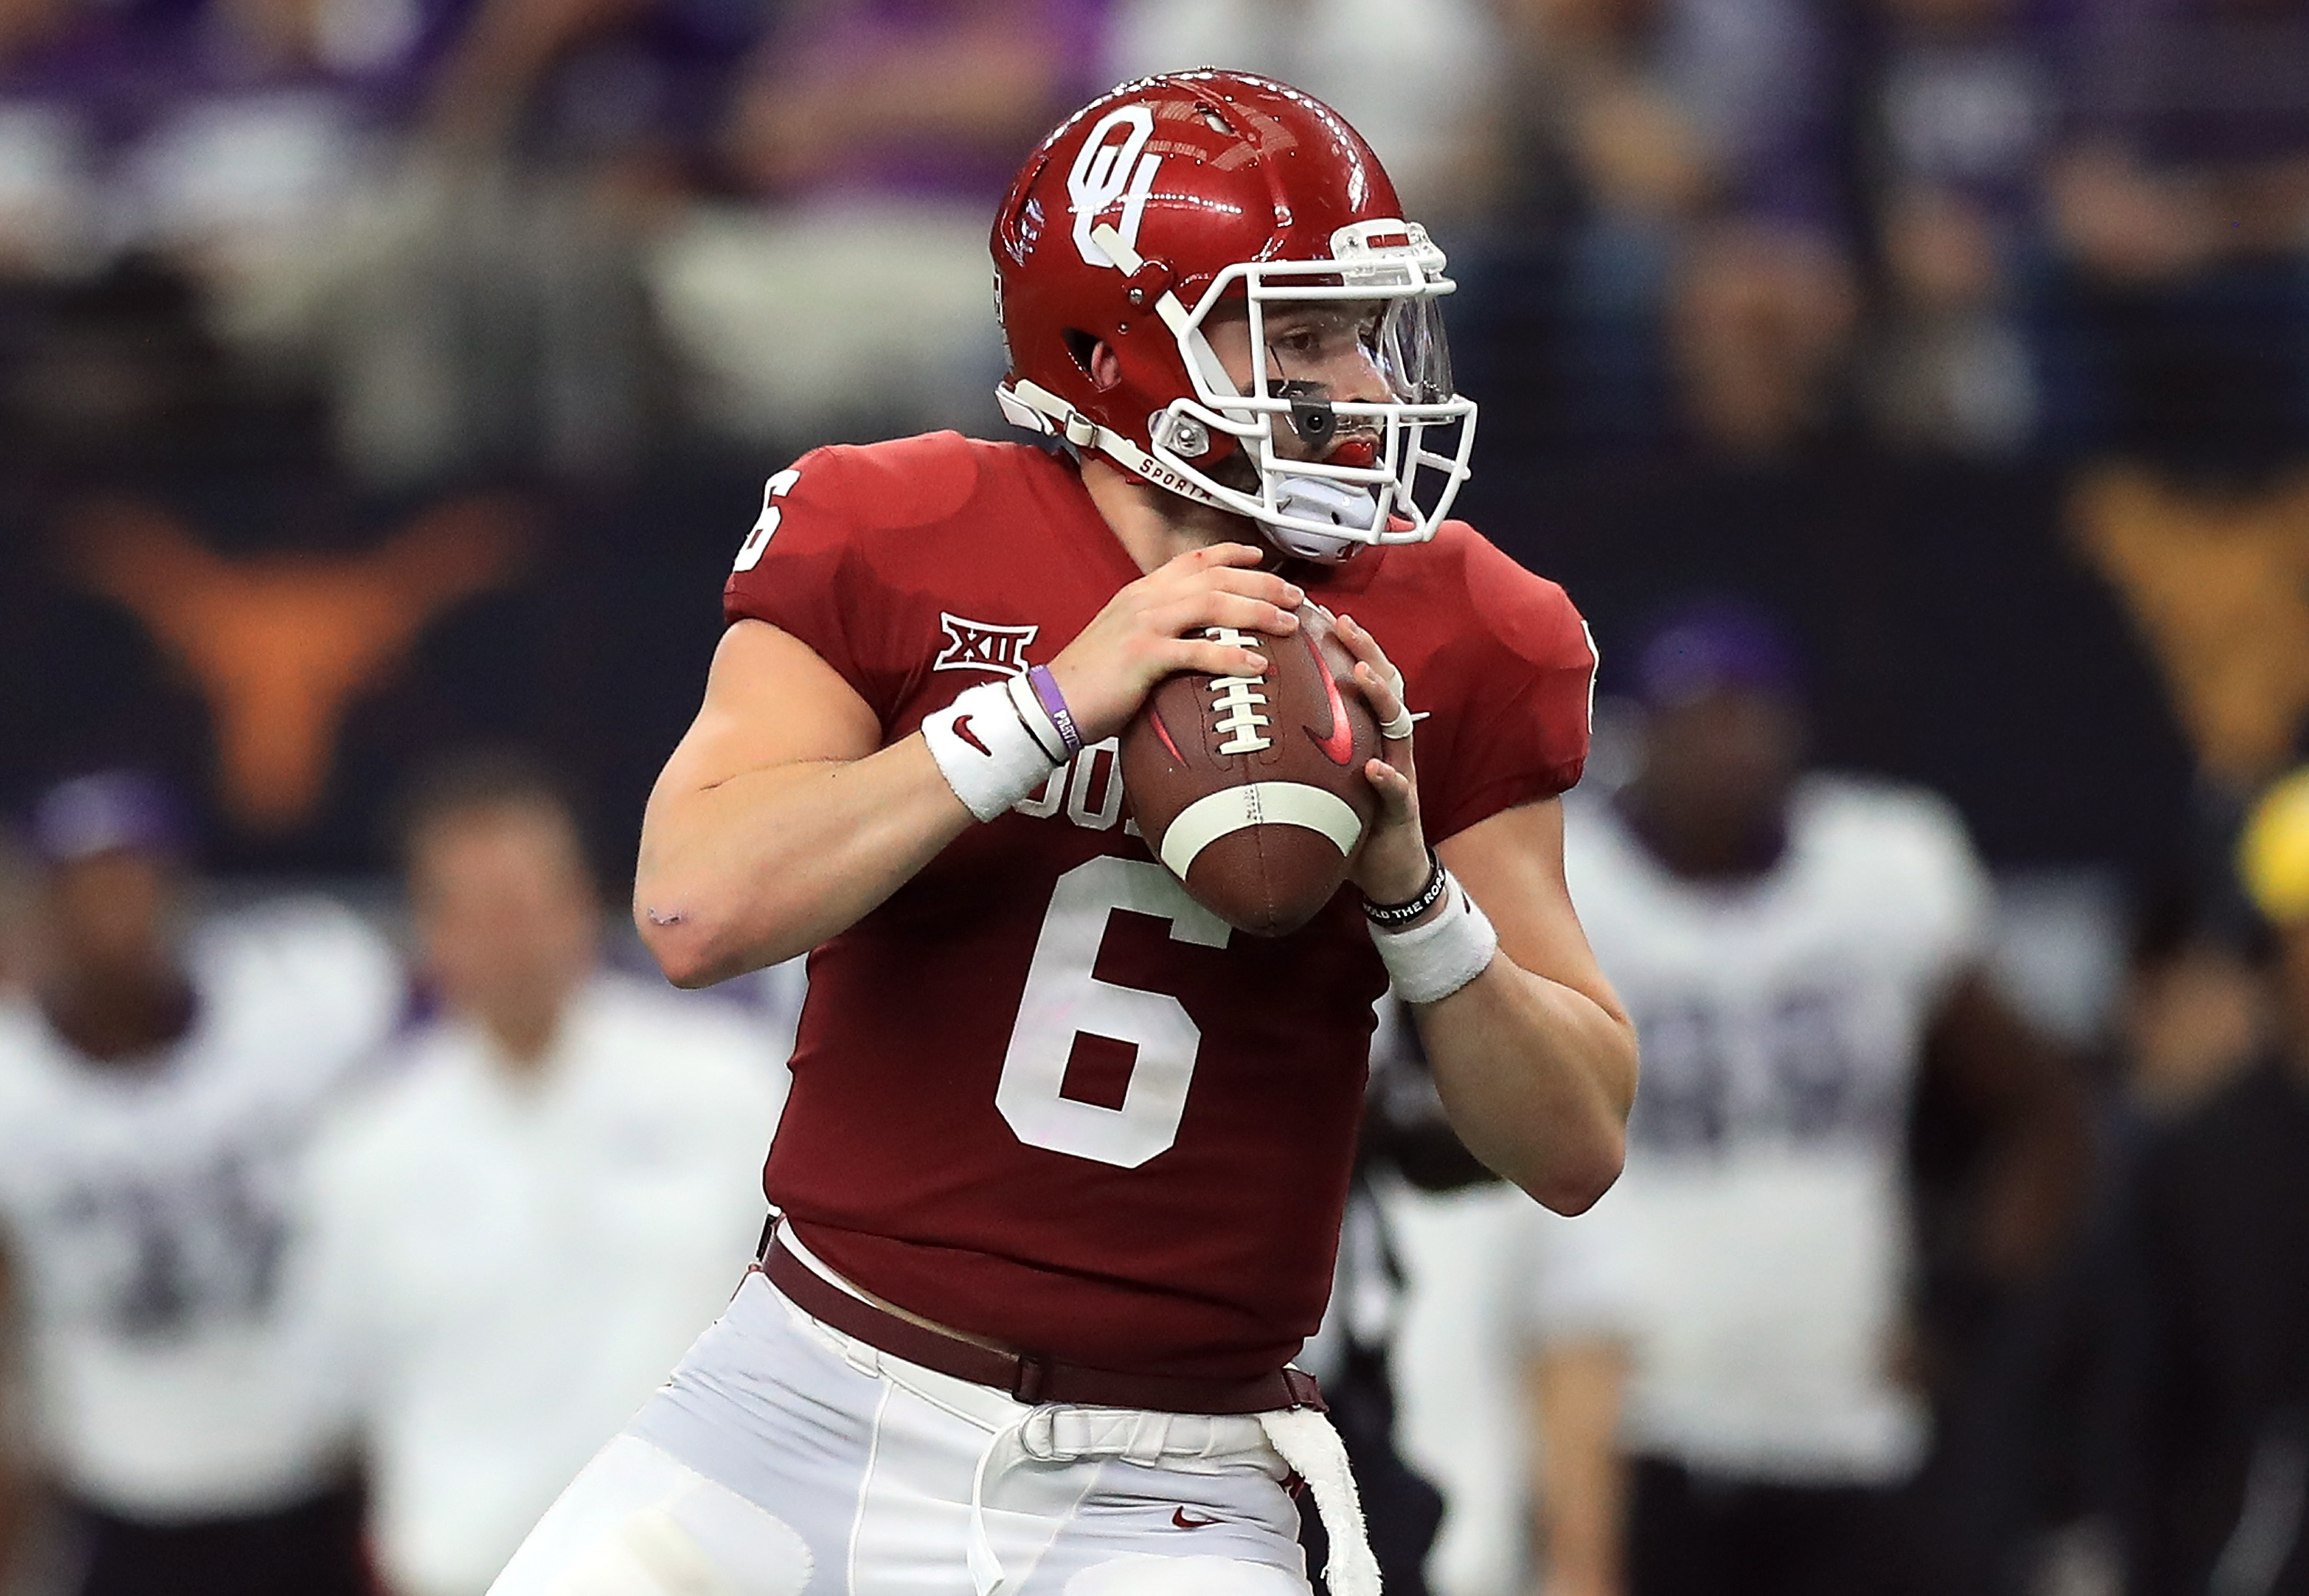 Jacksonville Jaguars: Is Baker Mayfield worthy of a first round